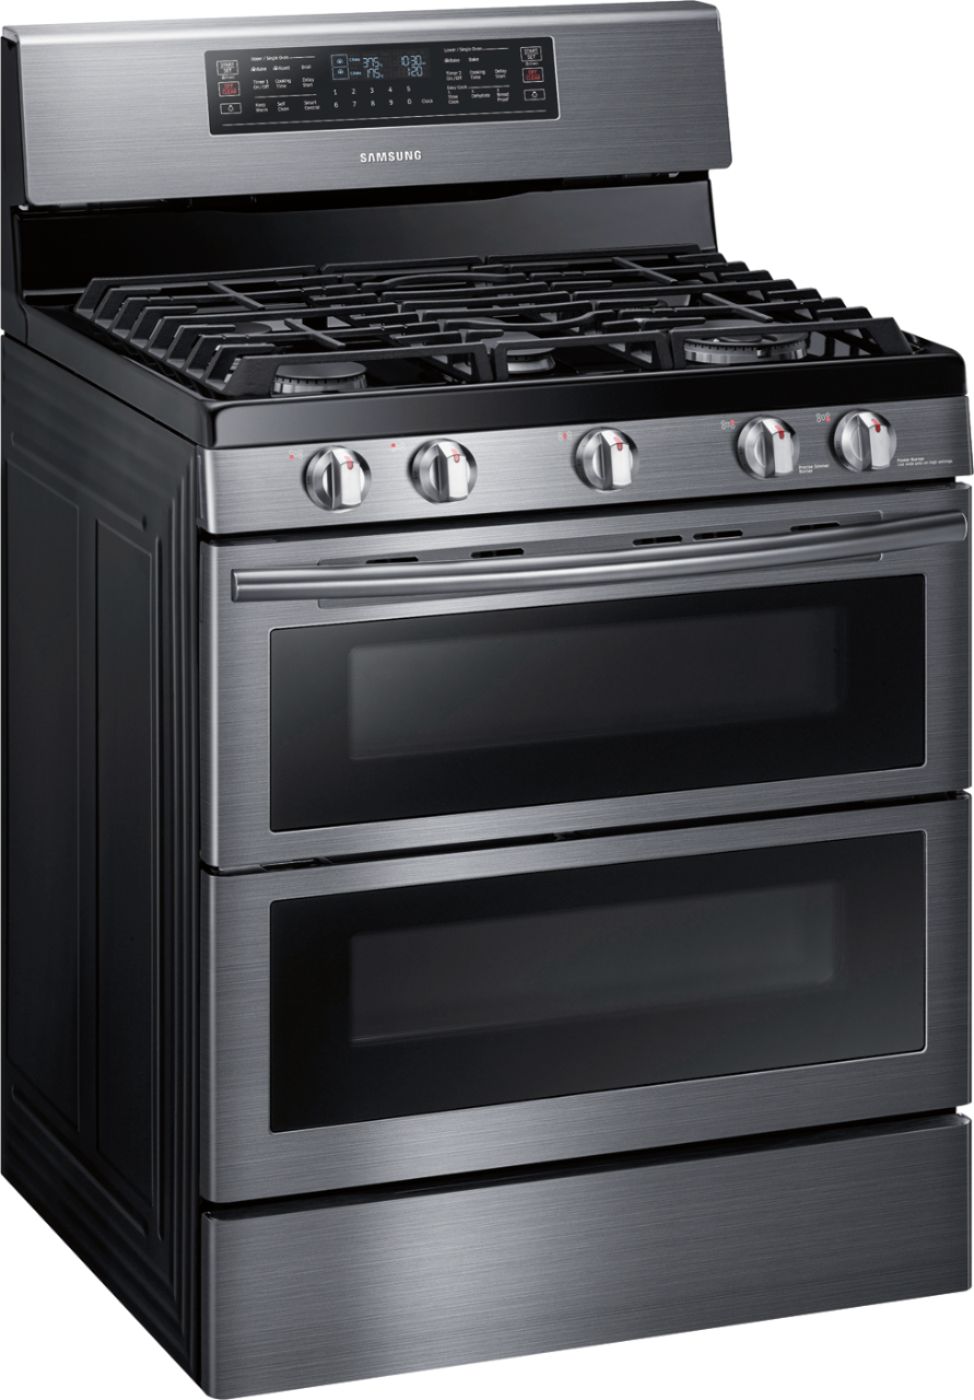 Angle View: Samsung - Flex Duo 5.8 Cu. Ft. Self-Cleaning Freestanding Fingerprint Resistant Gas Convection Range - Black Stainless Steel